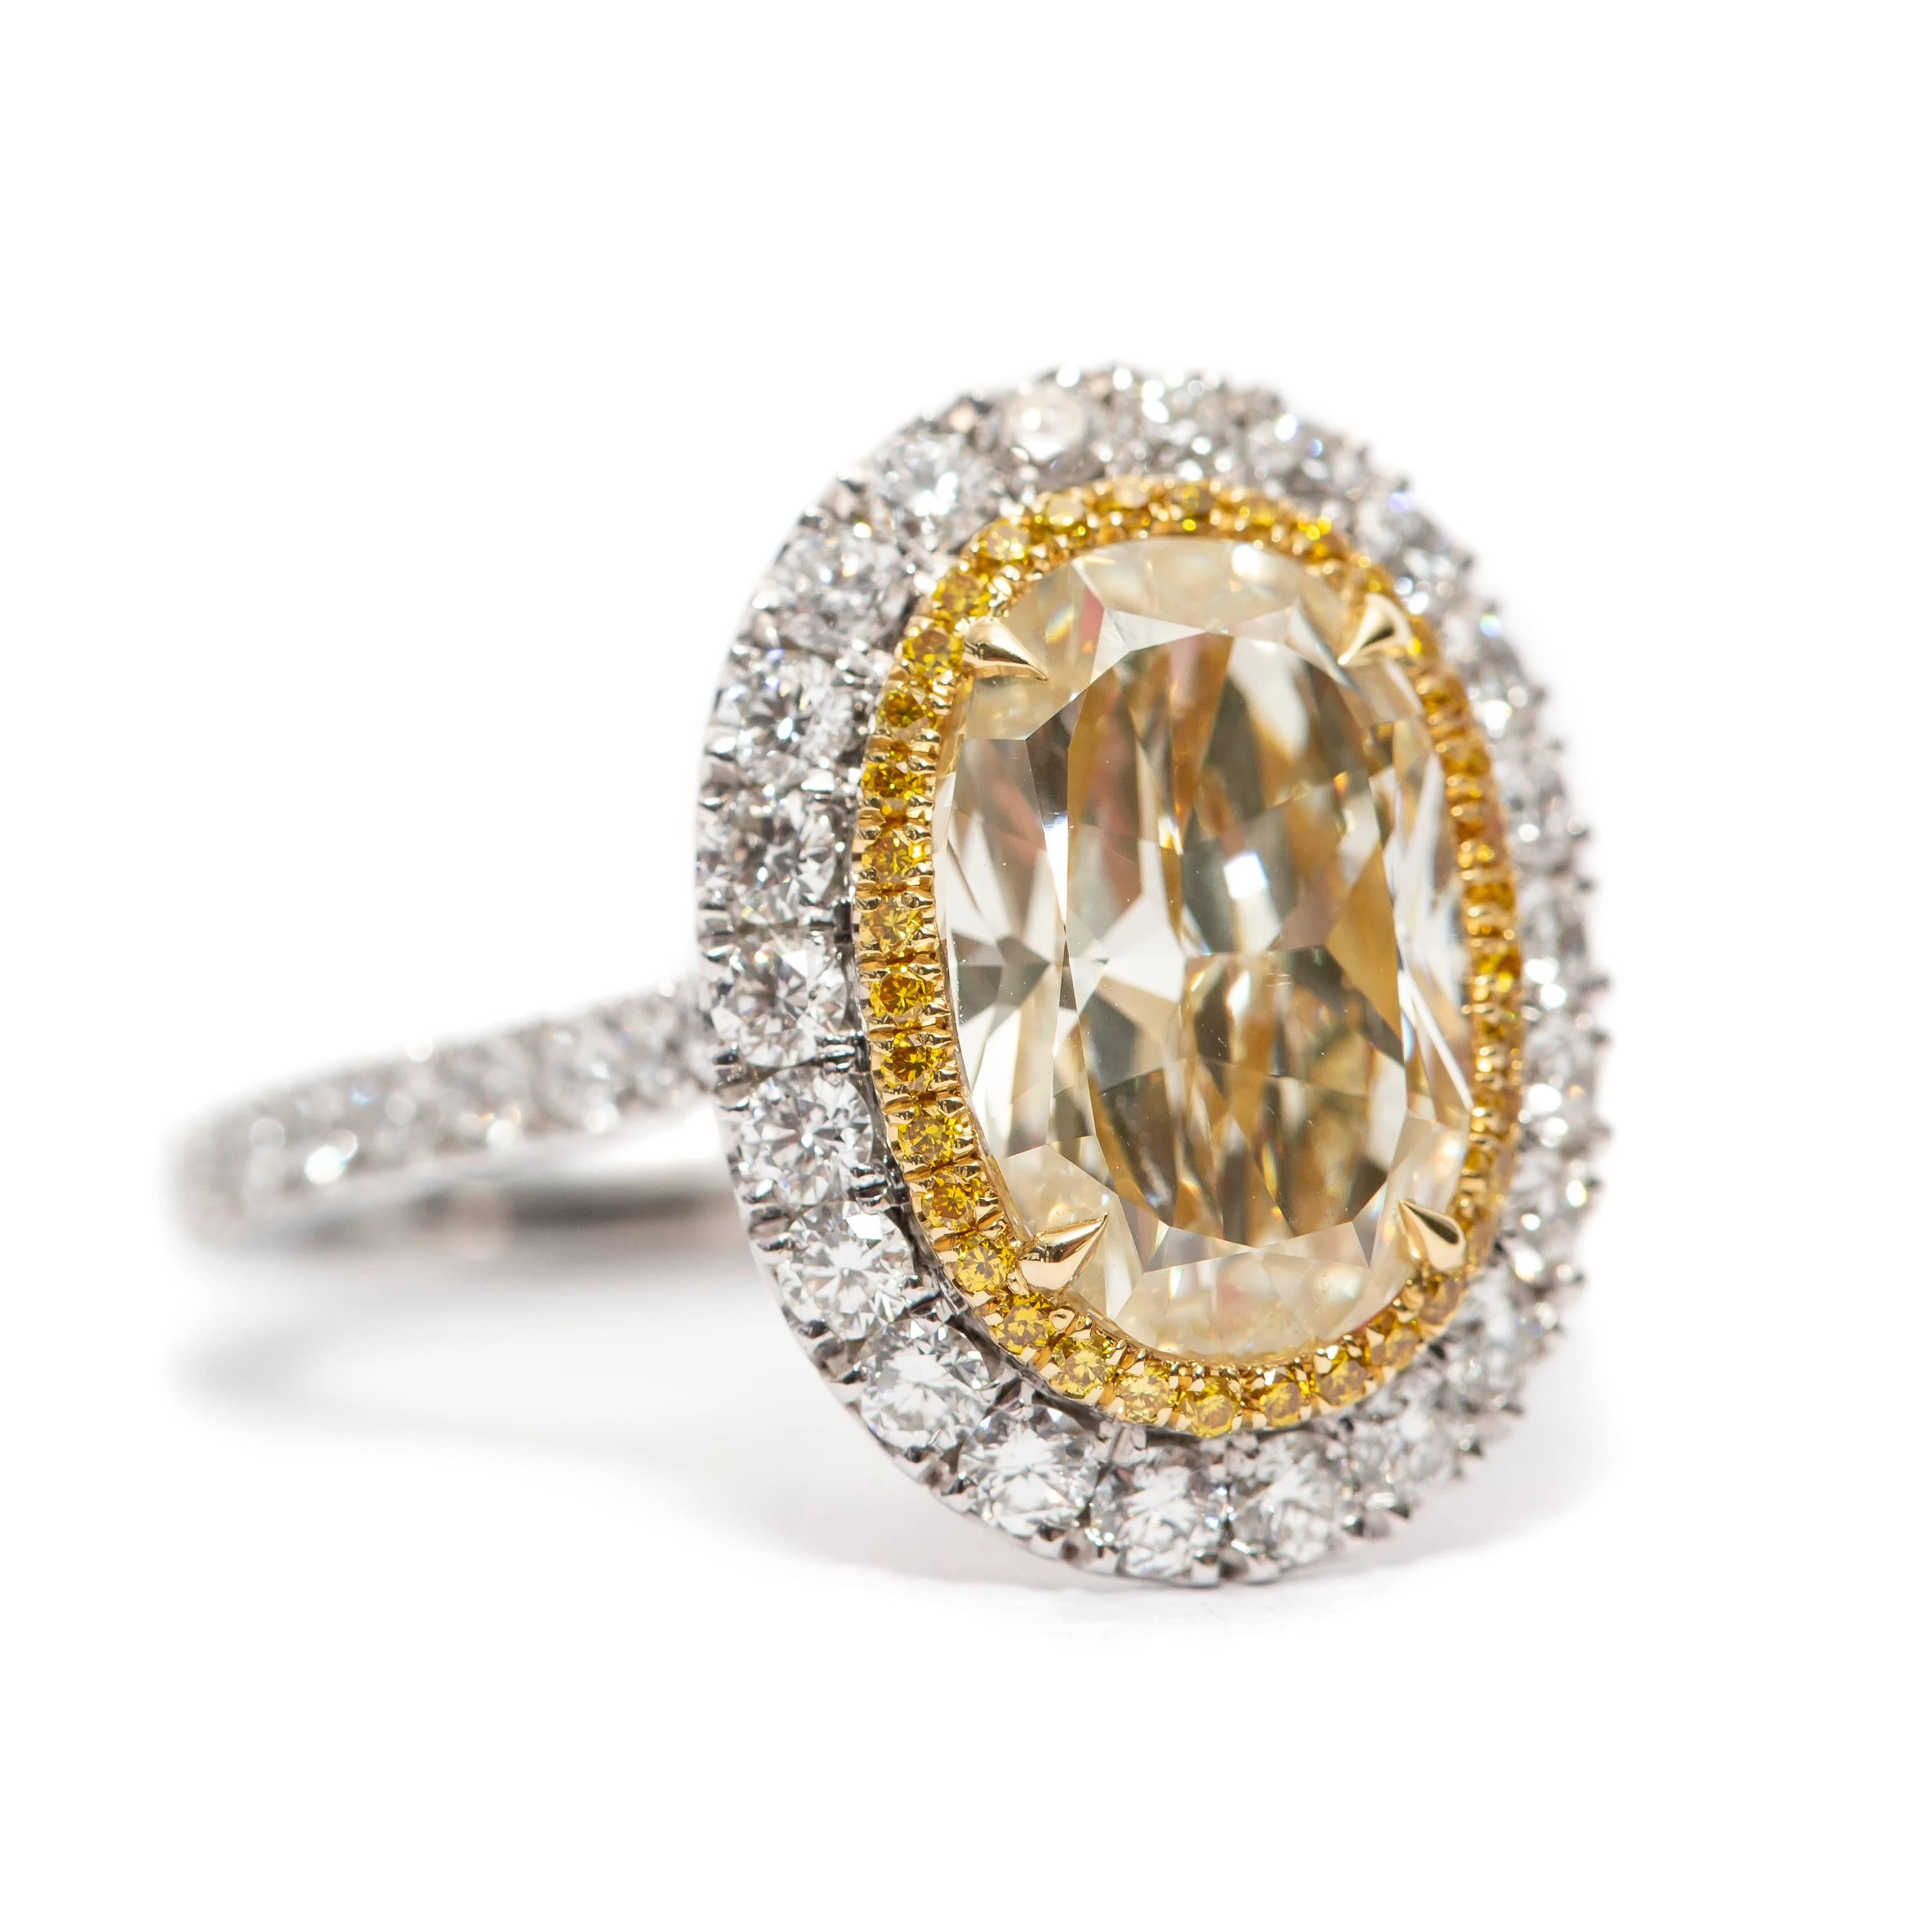 This Spectacular GIA Certified 3.16 Carat Yellow Oval Diamond Color N Clarity SI1 which is set in the center with 0.93 Carat of White Round Brilliant cut Diamonds on the Outer Halo flowing down the side of the shank, the inner halo features 0.13